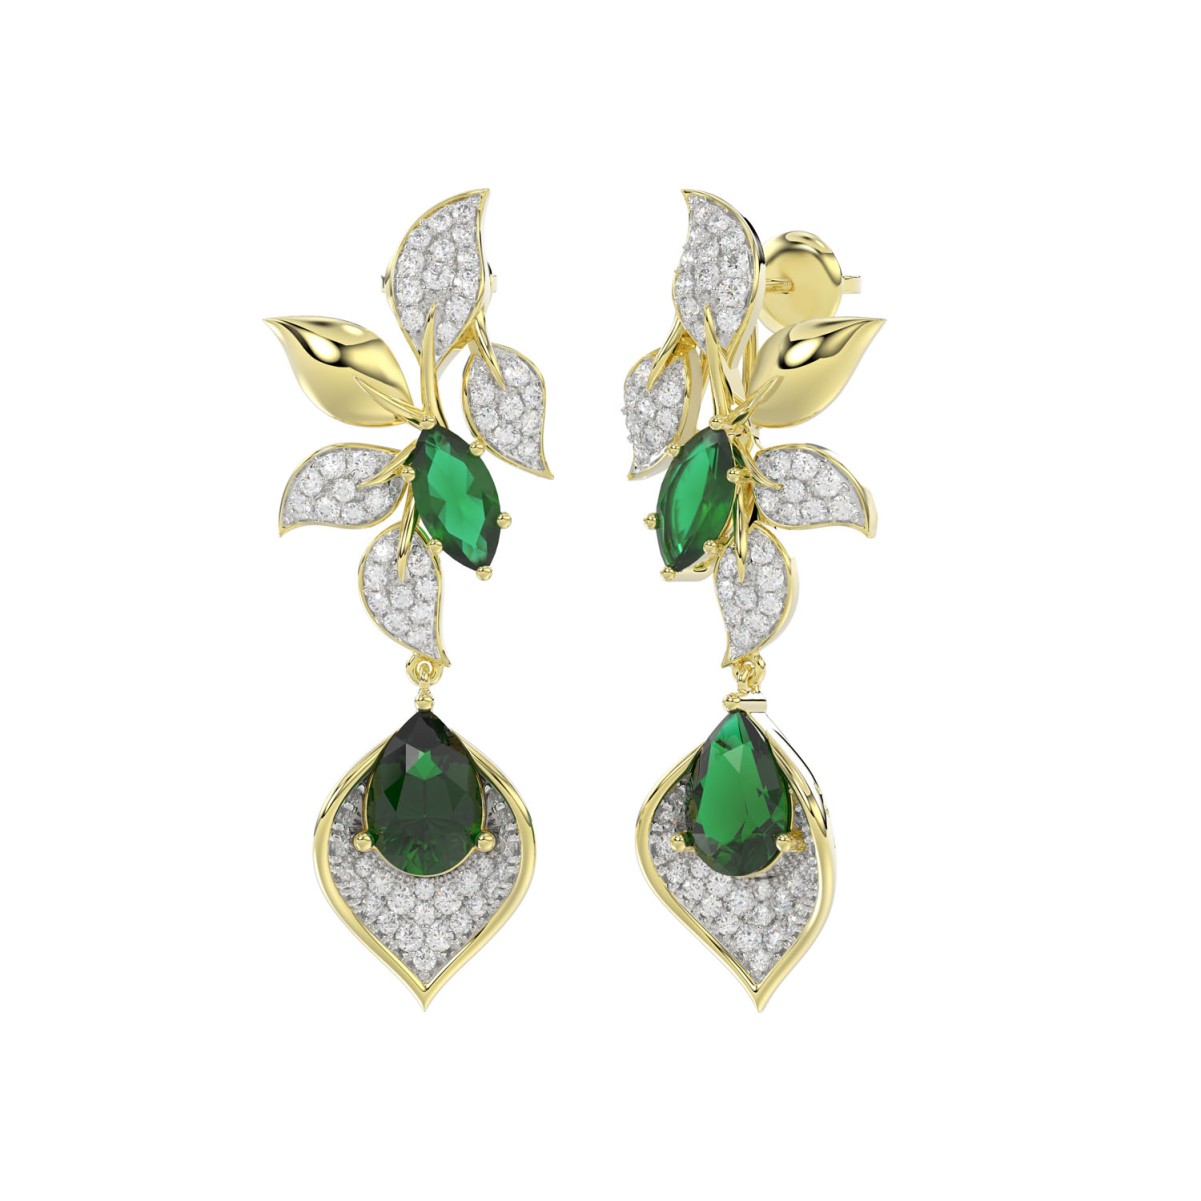 18K YELLOW GOLD 4 7/8CT ROUND/PEAR/MARQUISE DIAMOND LADIES EARRINGS(COLOR STONE GREEN EMERALD PEAR DIAMOND 4 5/8CT/MARQUISE DIAMOND 1 1/5CT)